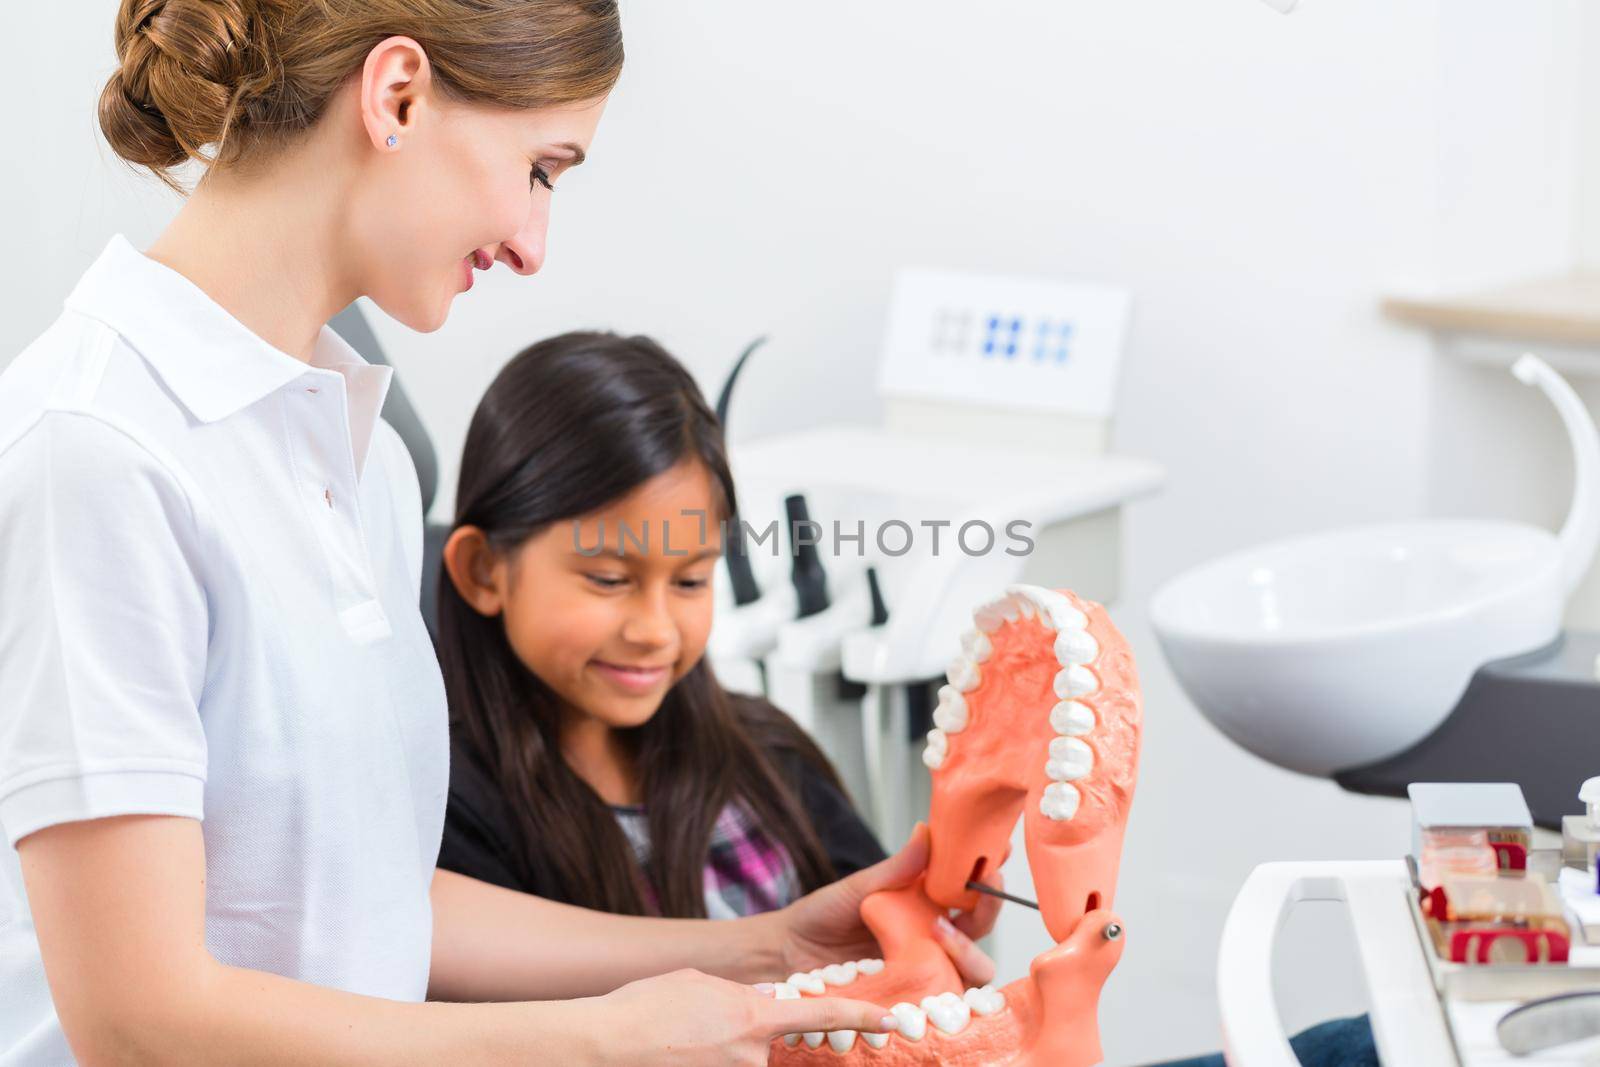 Dentist in surgery holds denture and explains a child patient with a toothbrush